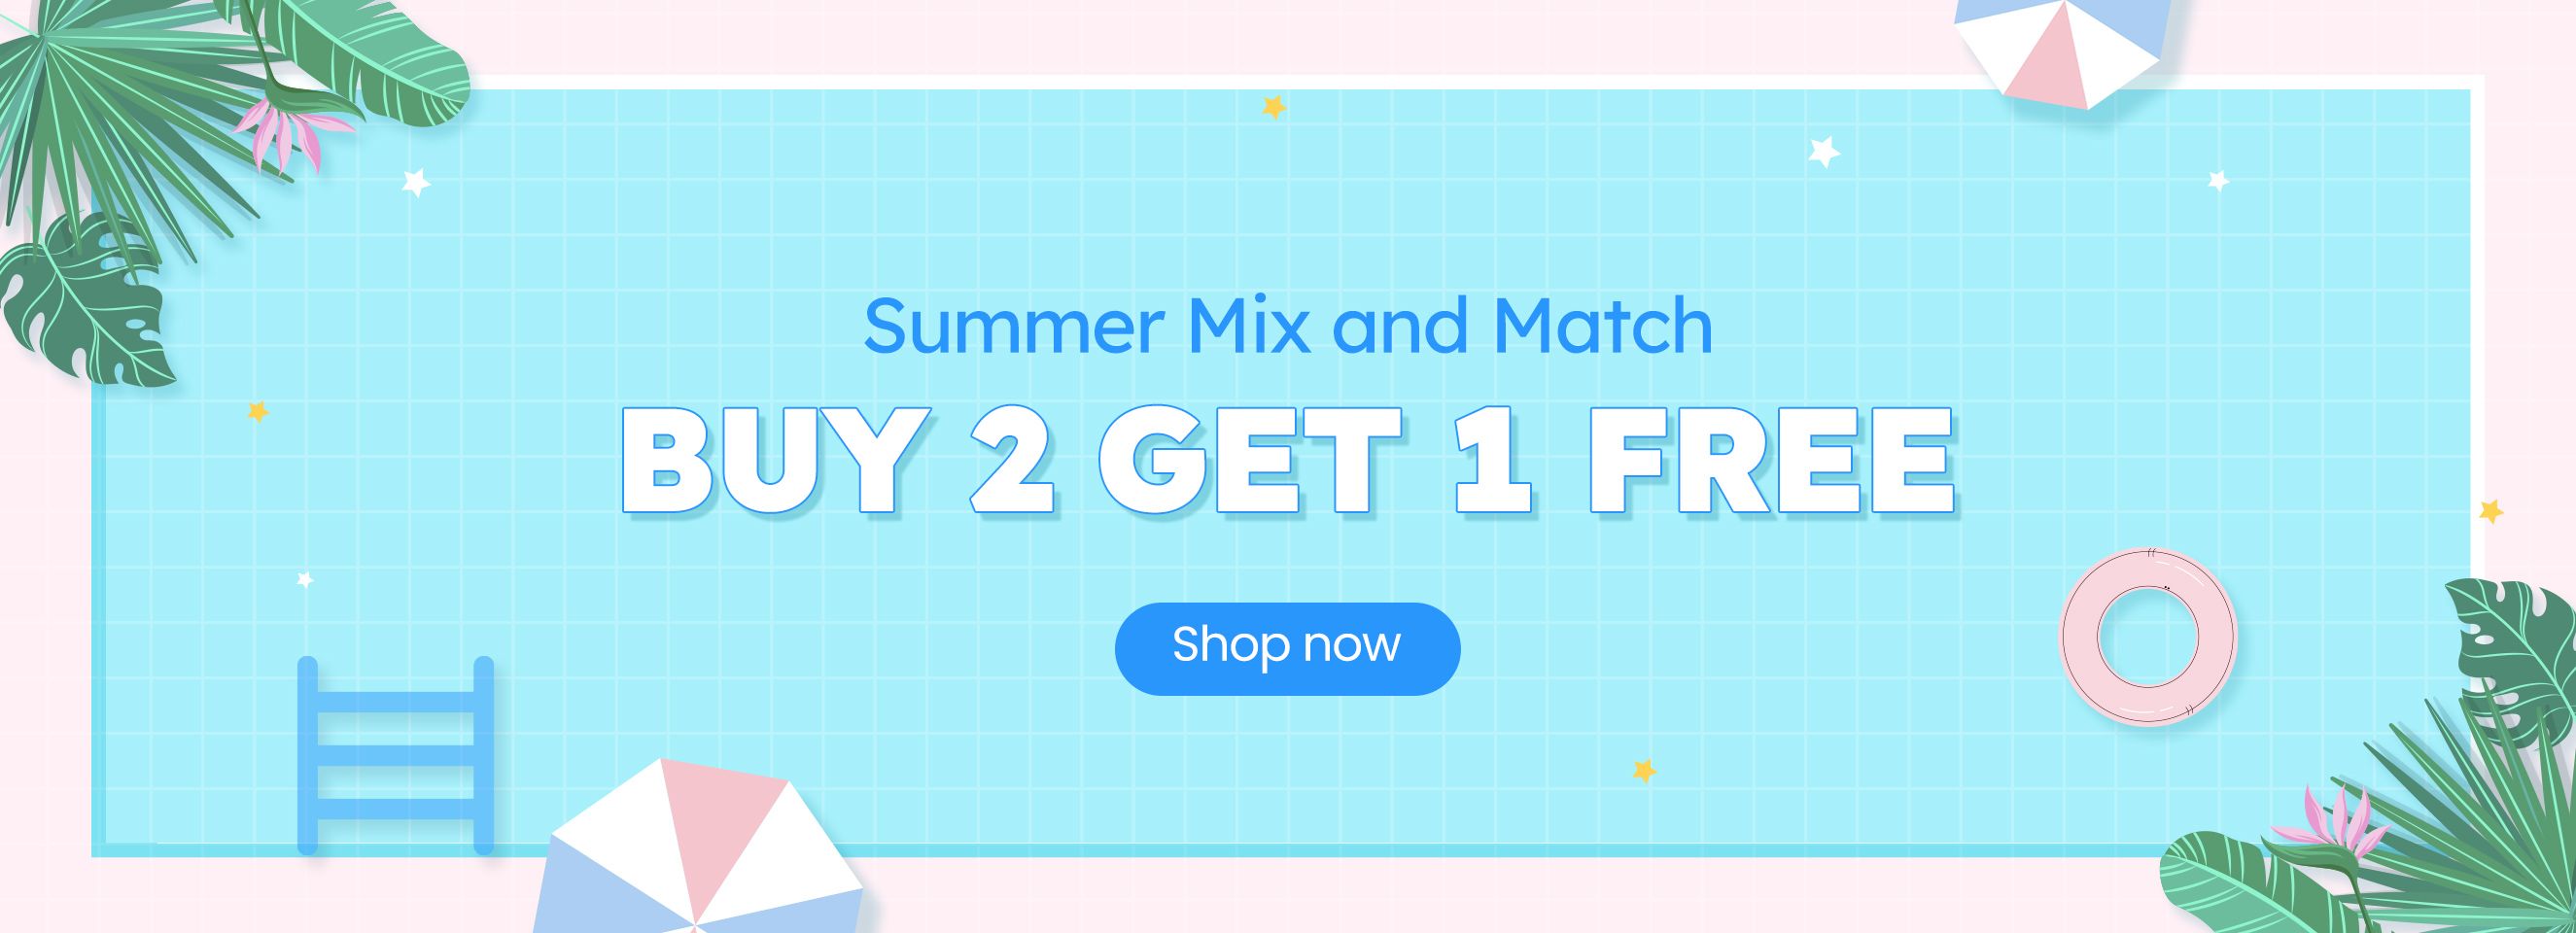 Click it to join BUY 2 GET 1 FREE activity